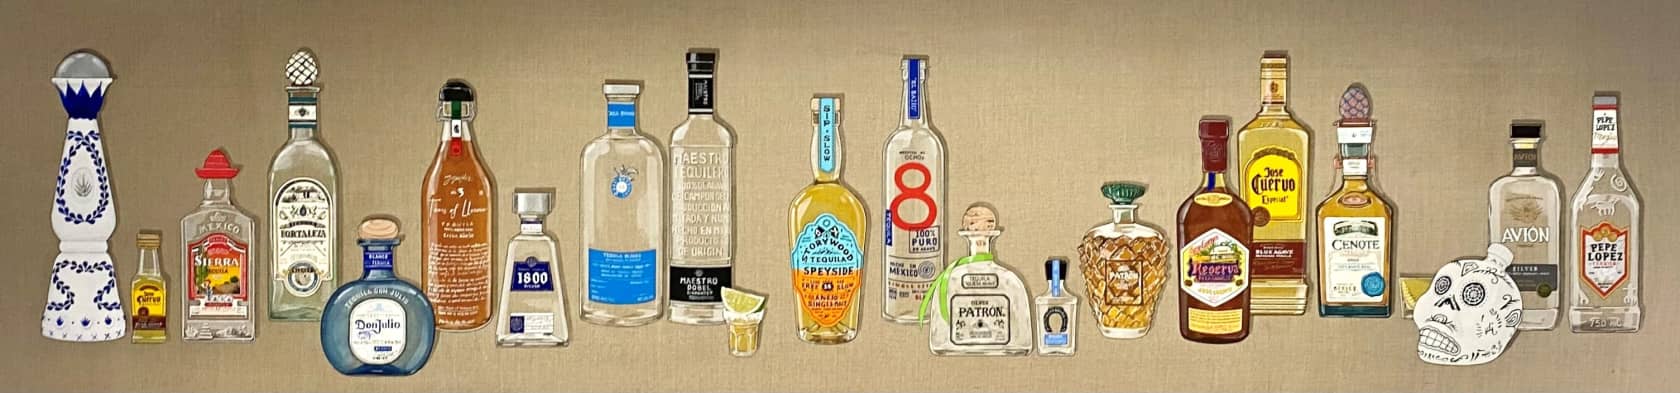 Sooyoung Chung Full of Choice 7 (Tequila) Acrylic on Linen